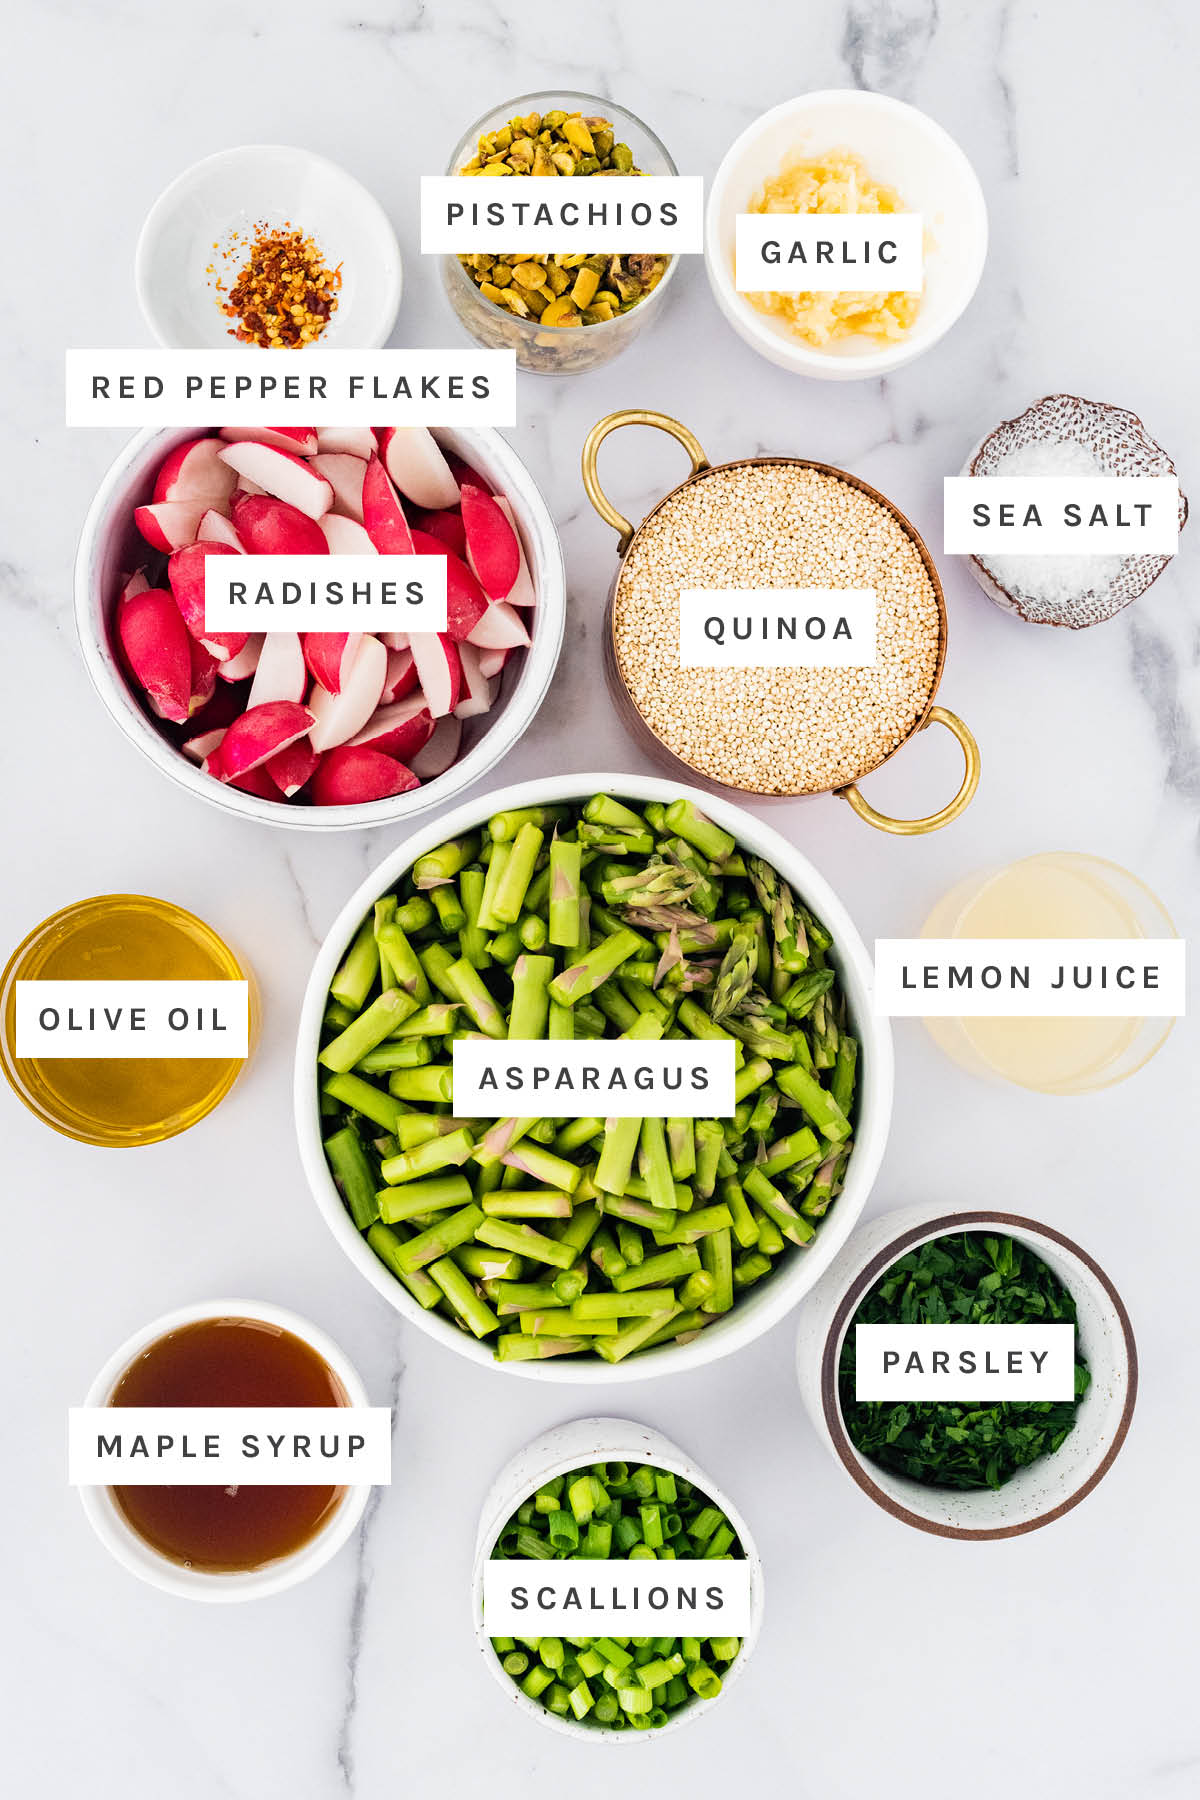 Ingredients measured out to make Spring Quinoa Salad: red pepper flakes, pistachios, garlic, radishes, quinoa, sea salt, olive oil, asparagus, lemon juice, maple syrup, scallions and parsley.